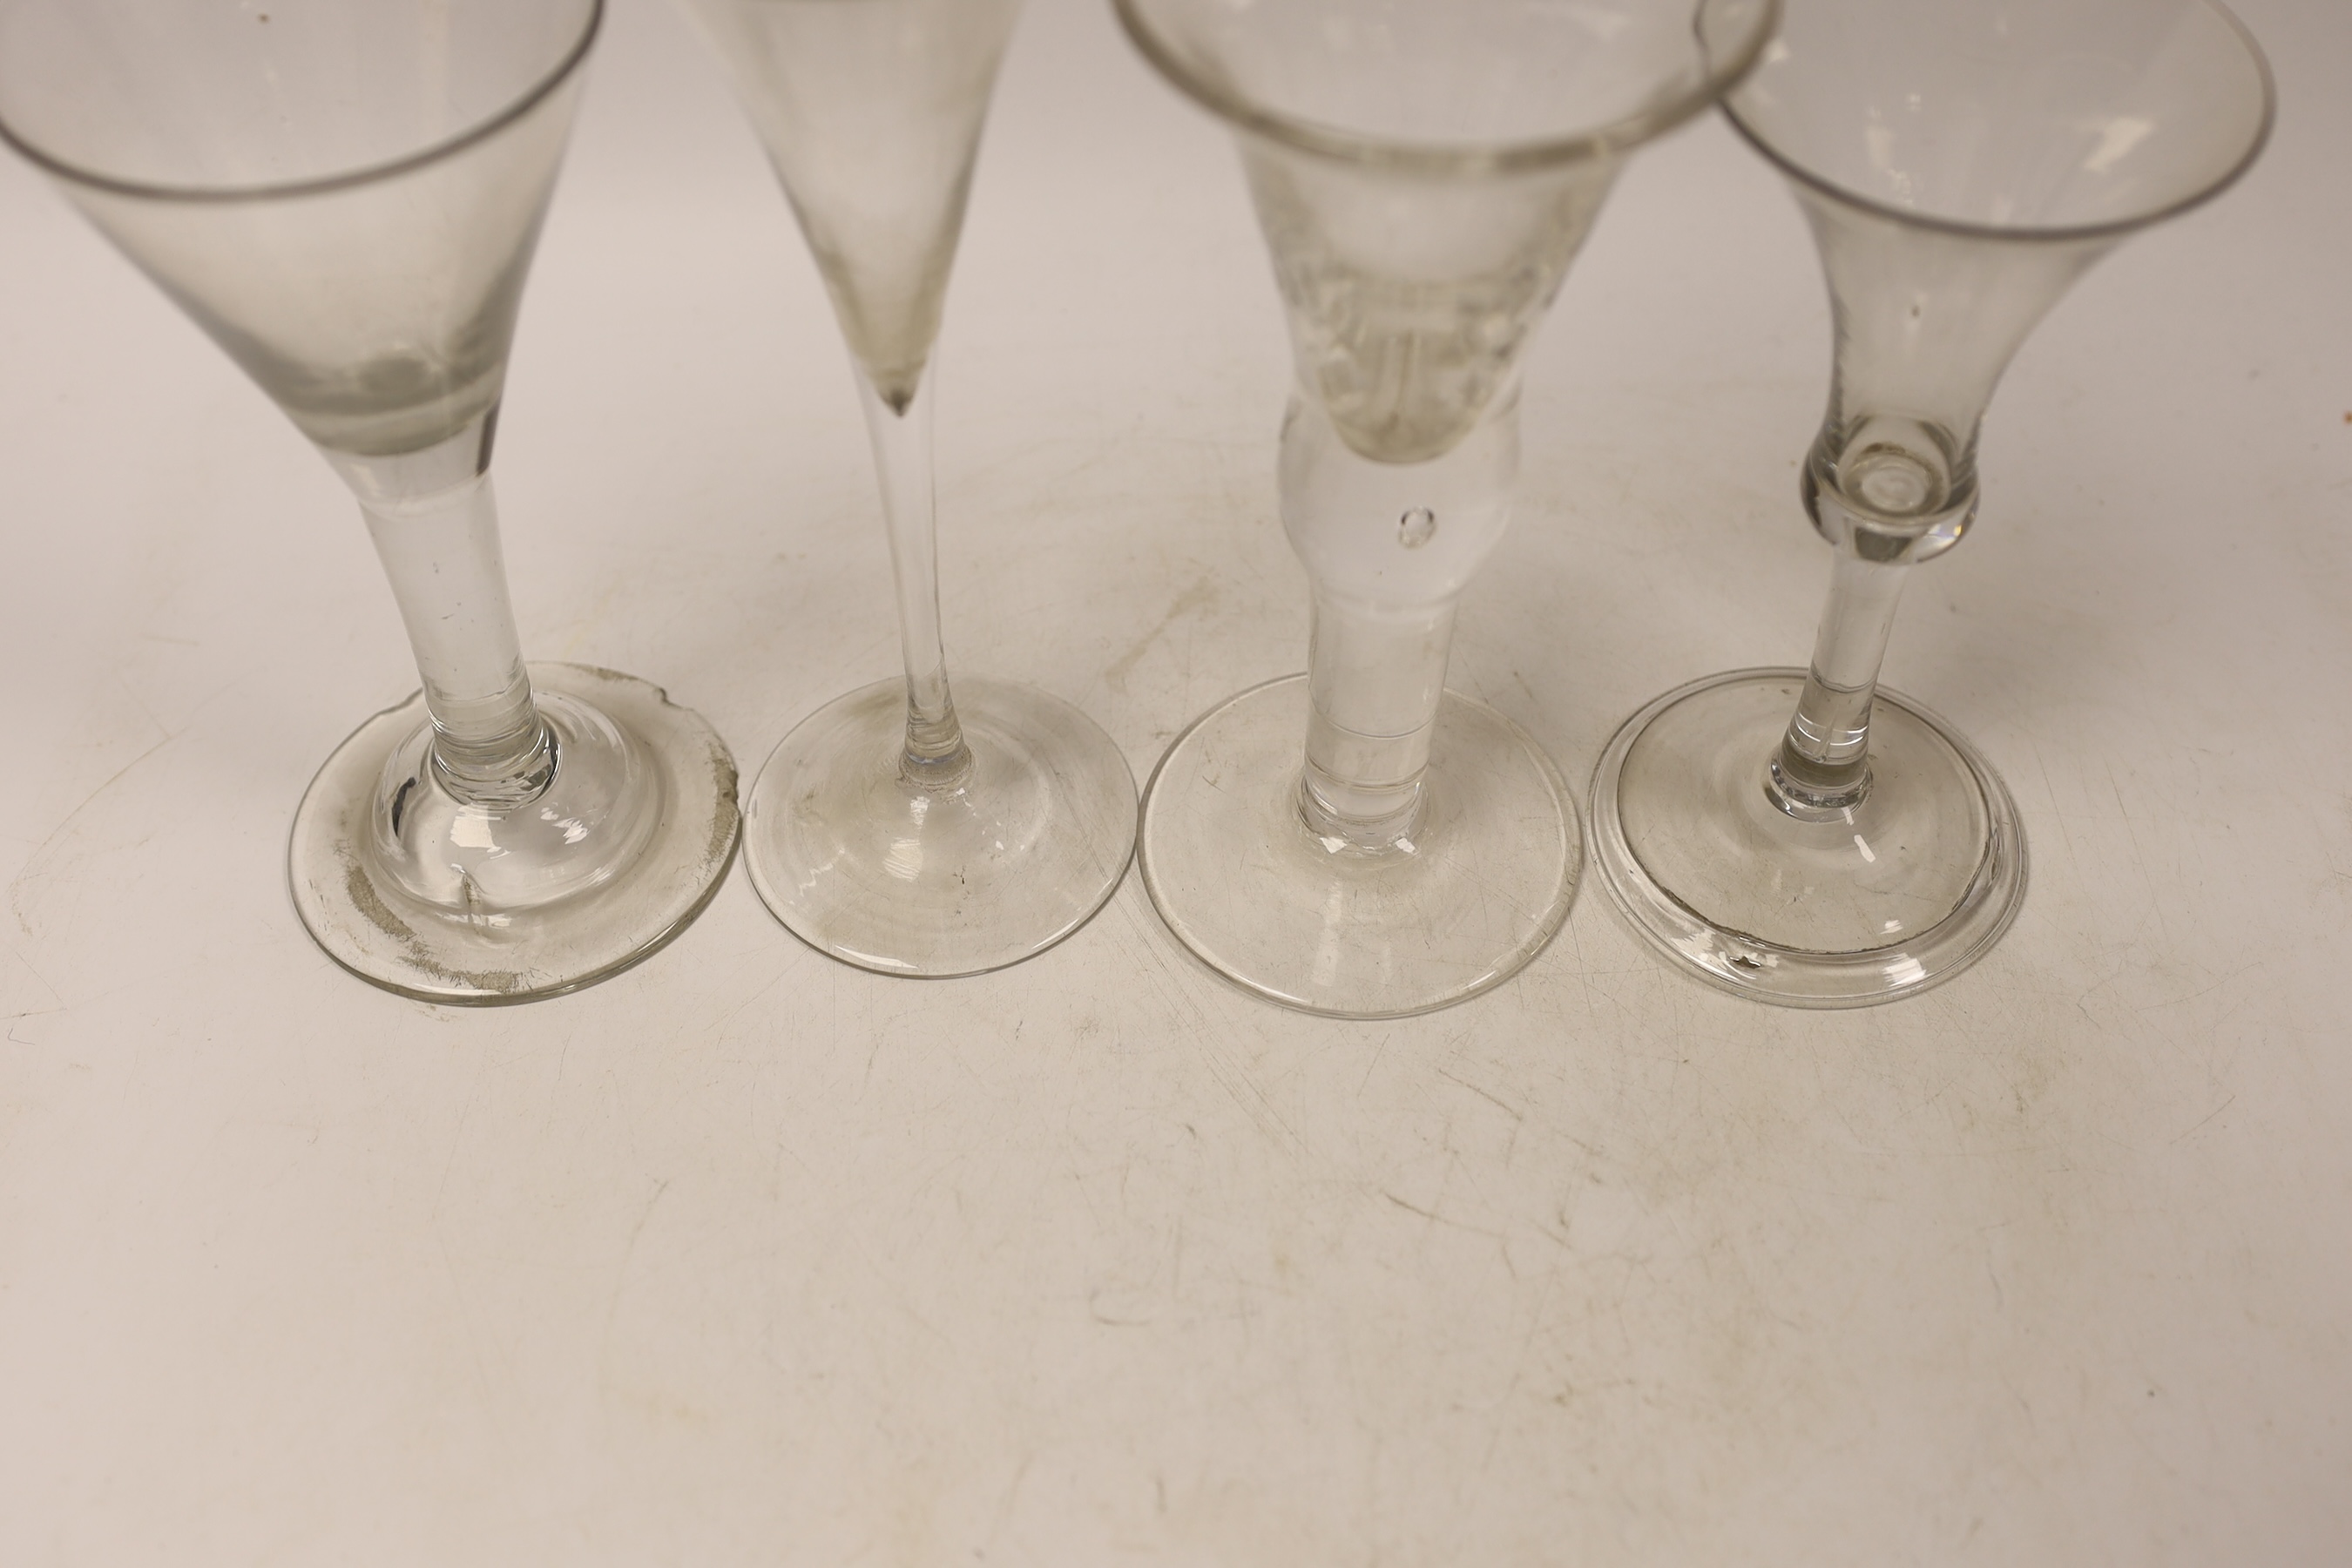 Three mid-18th century plain stem wine glasses, two with trumpet shaped bowls and a bell-shaped example with a folded foot, together with a reproduction drinking glass, tallest 20cm (4)